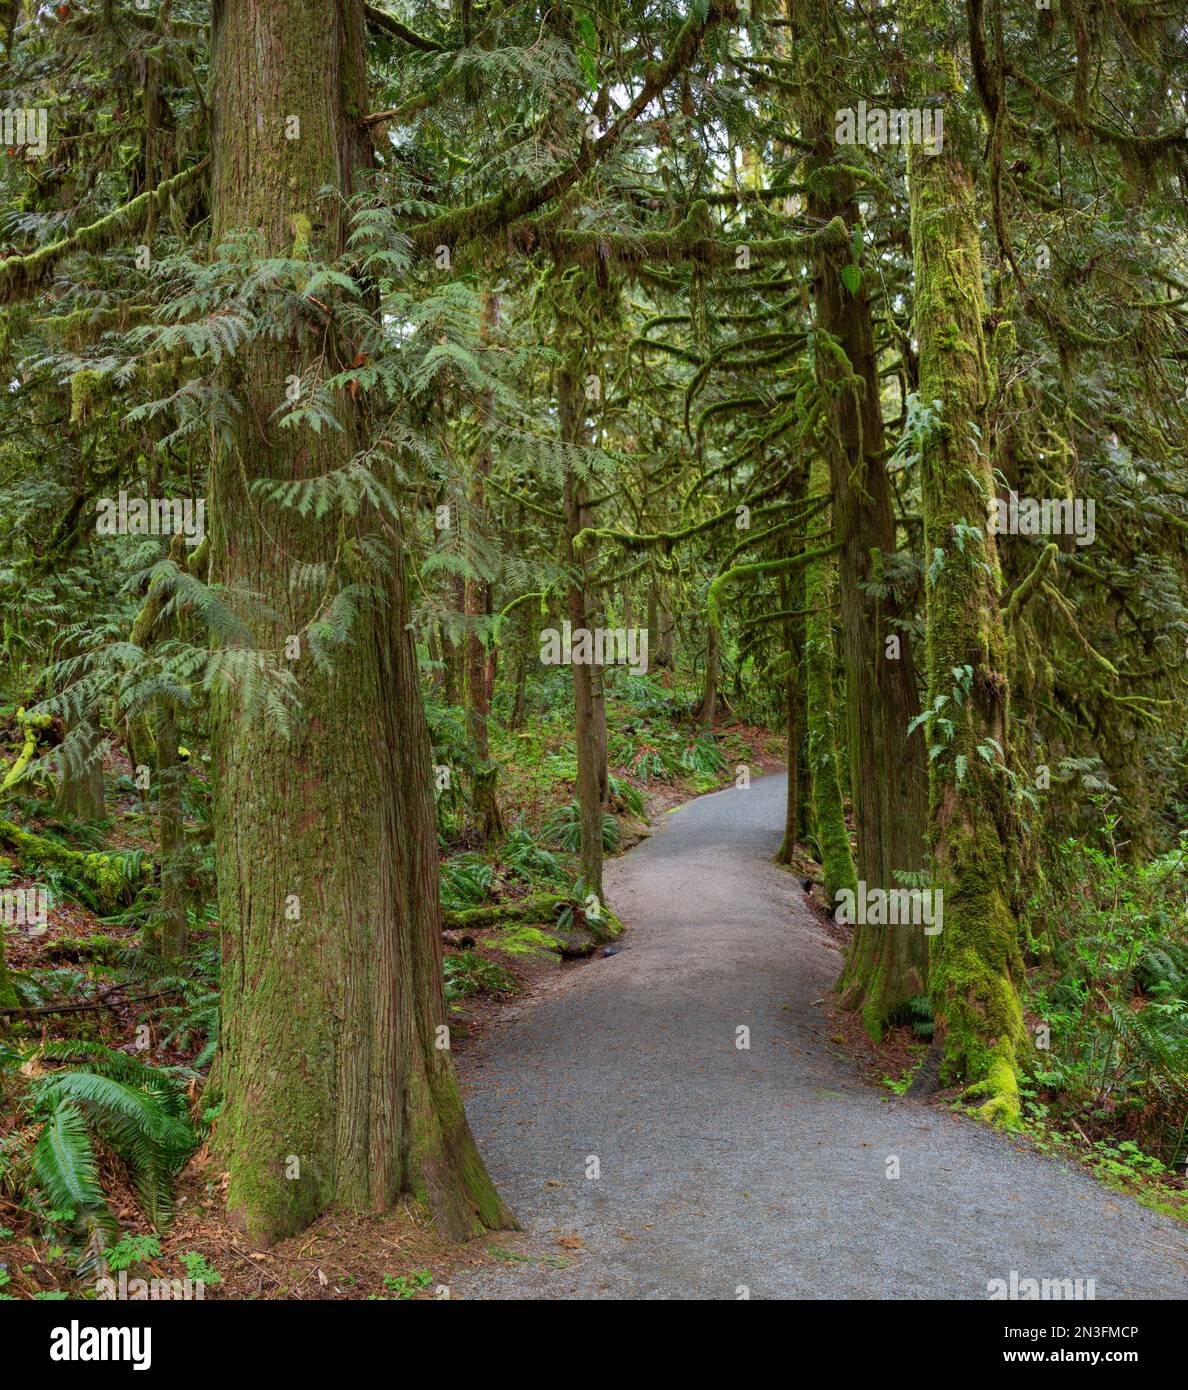 Trail winding through a lush forest, Houston Trail in Derby Reach Regional Park, Langley, BC; Langley, British Columbia, Canada Stock Photo